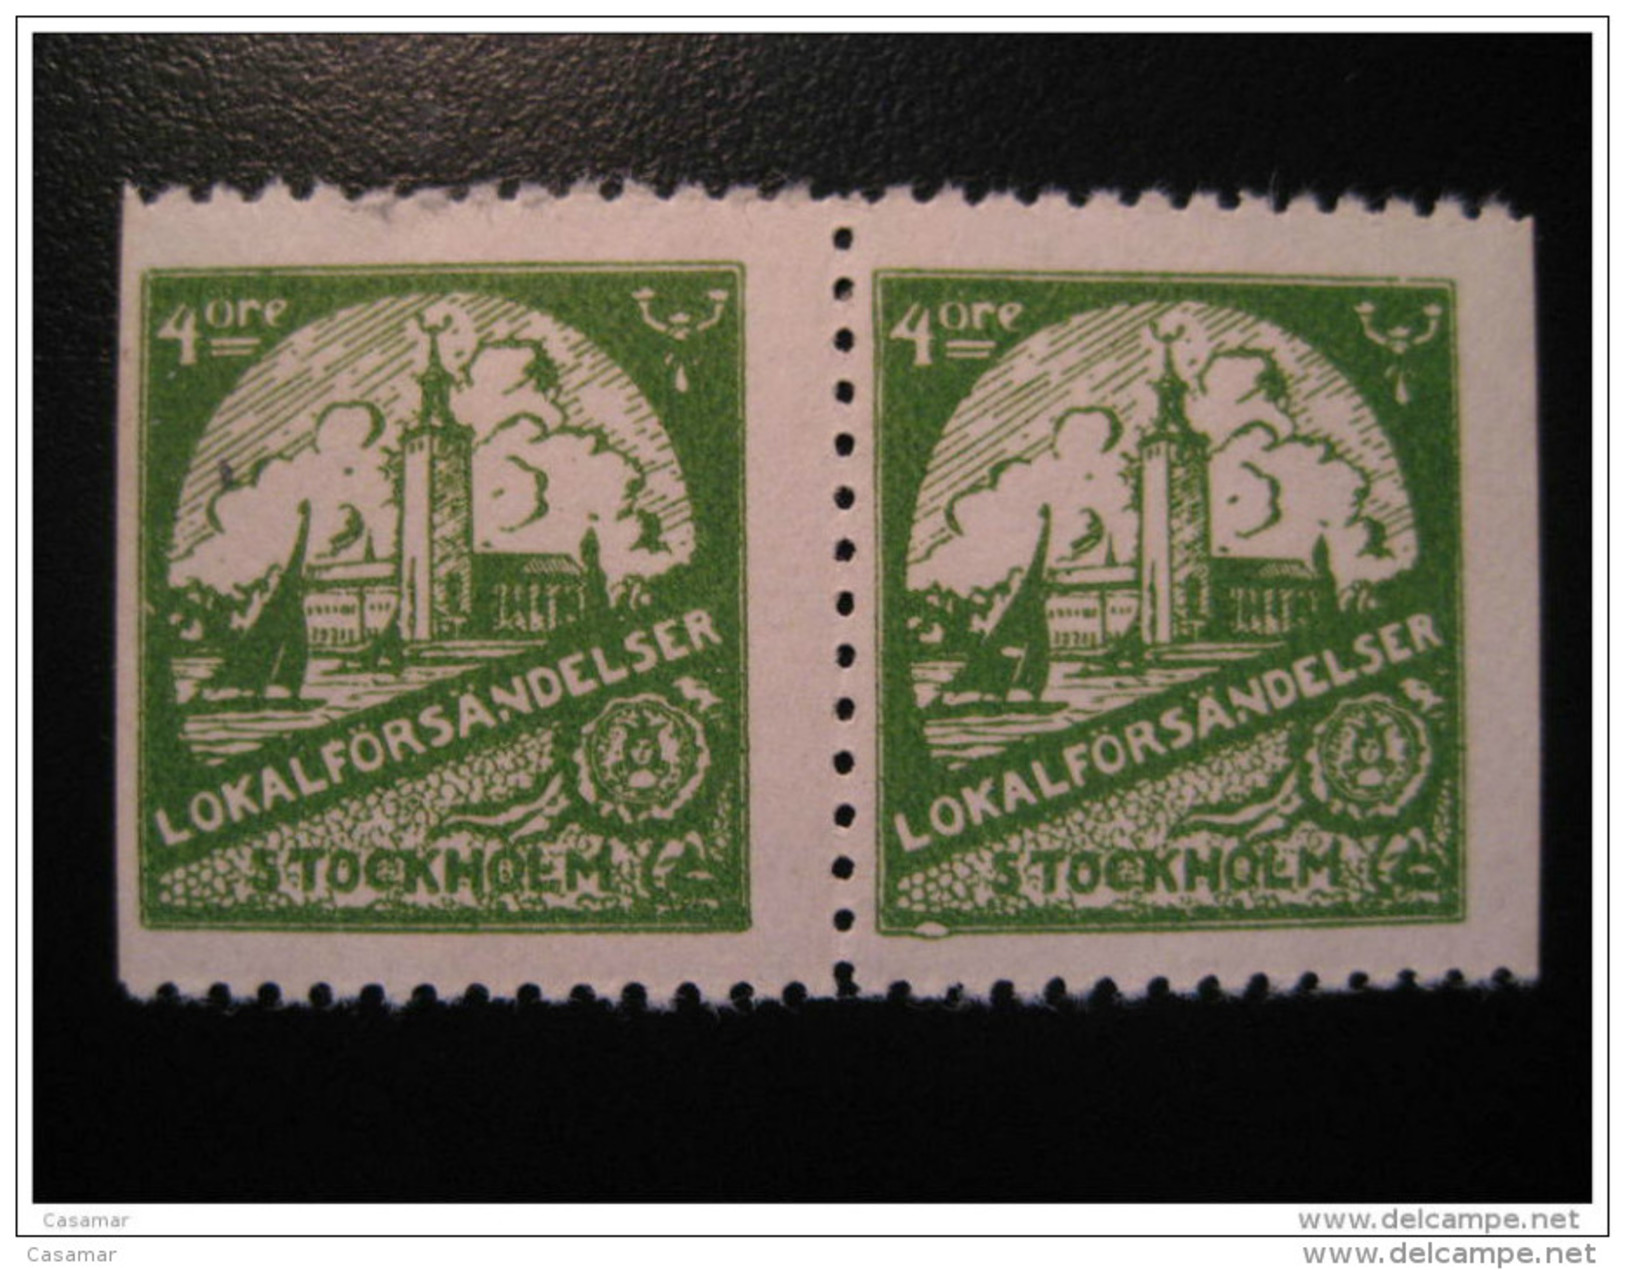 Stockholm Pair 4 Ore Local Stamp - Local Post Stamps